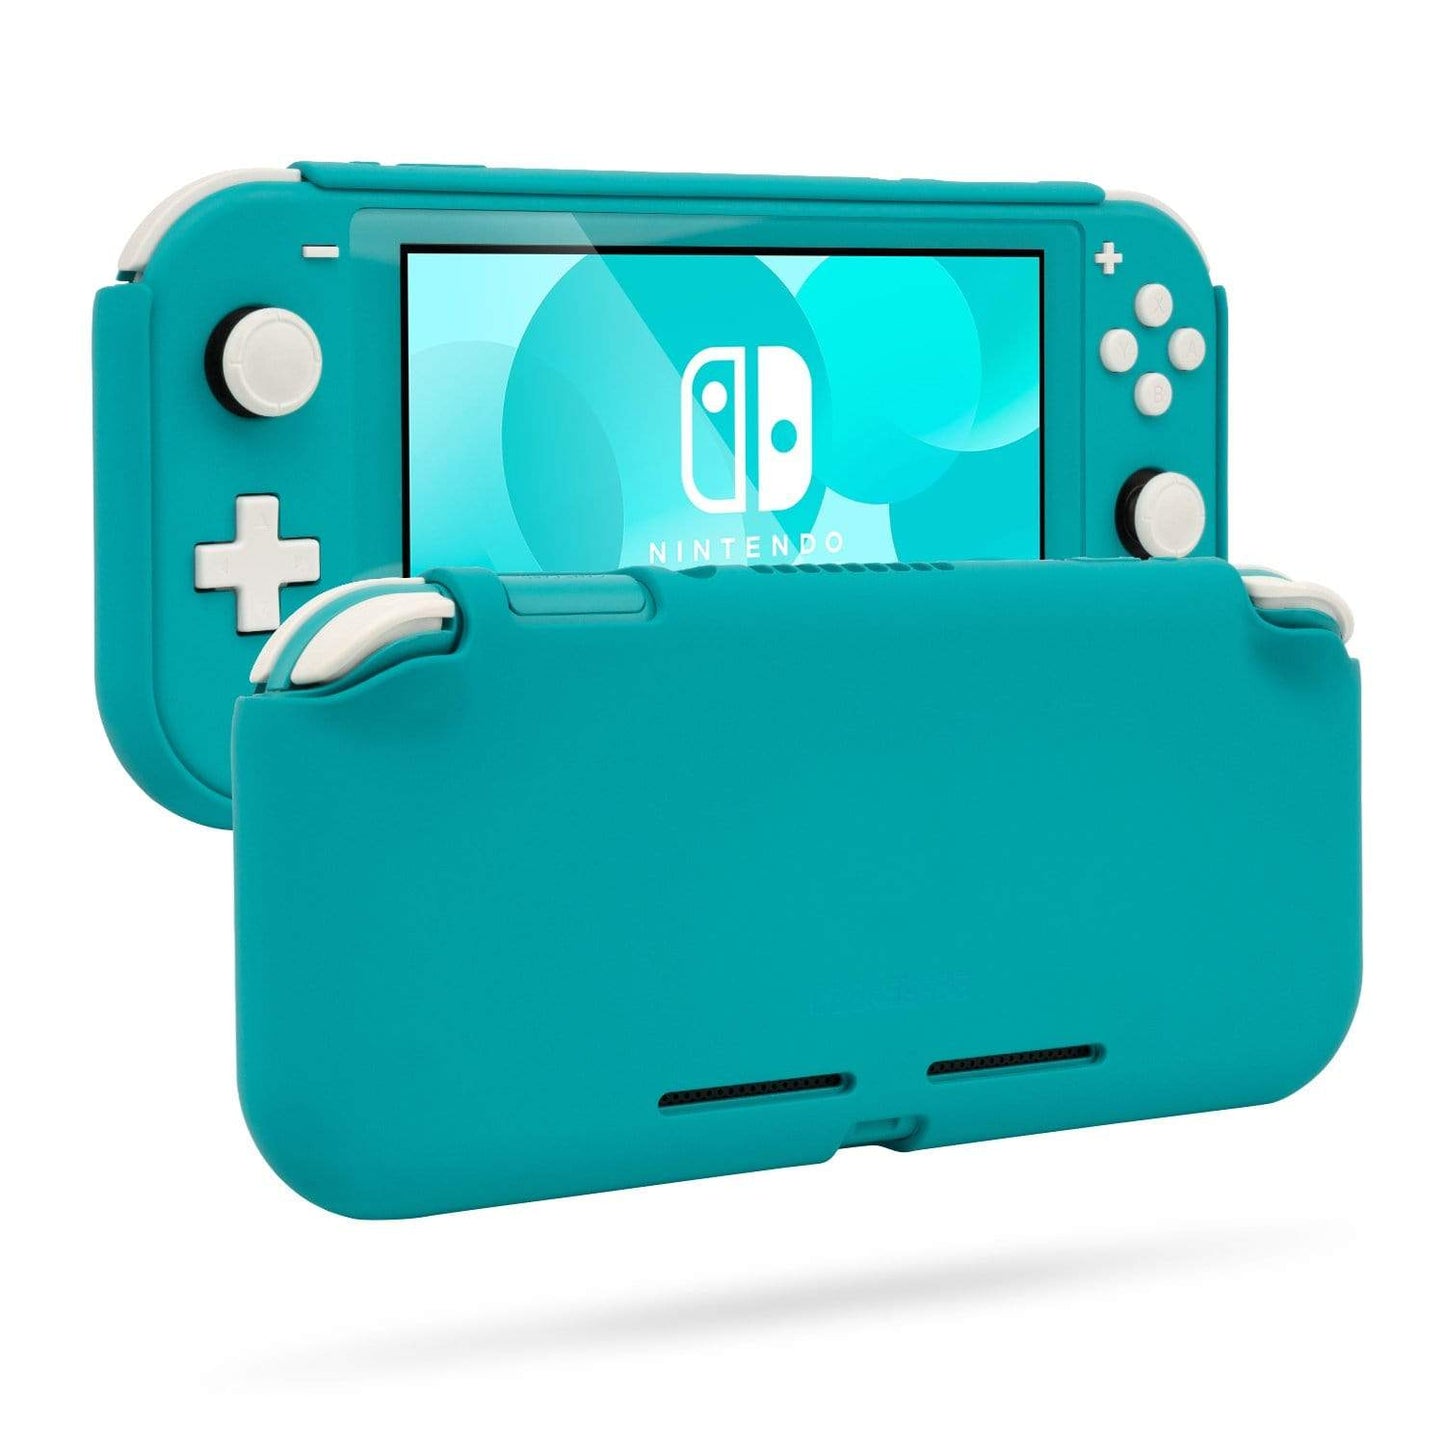 GeekShare Silicone Protective Case for Switch Lite Soft Silicone Case for Nintendo Switch Lite -- Gray